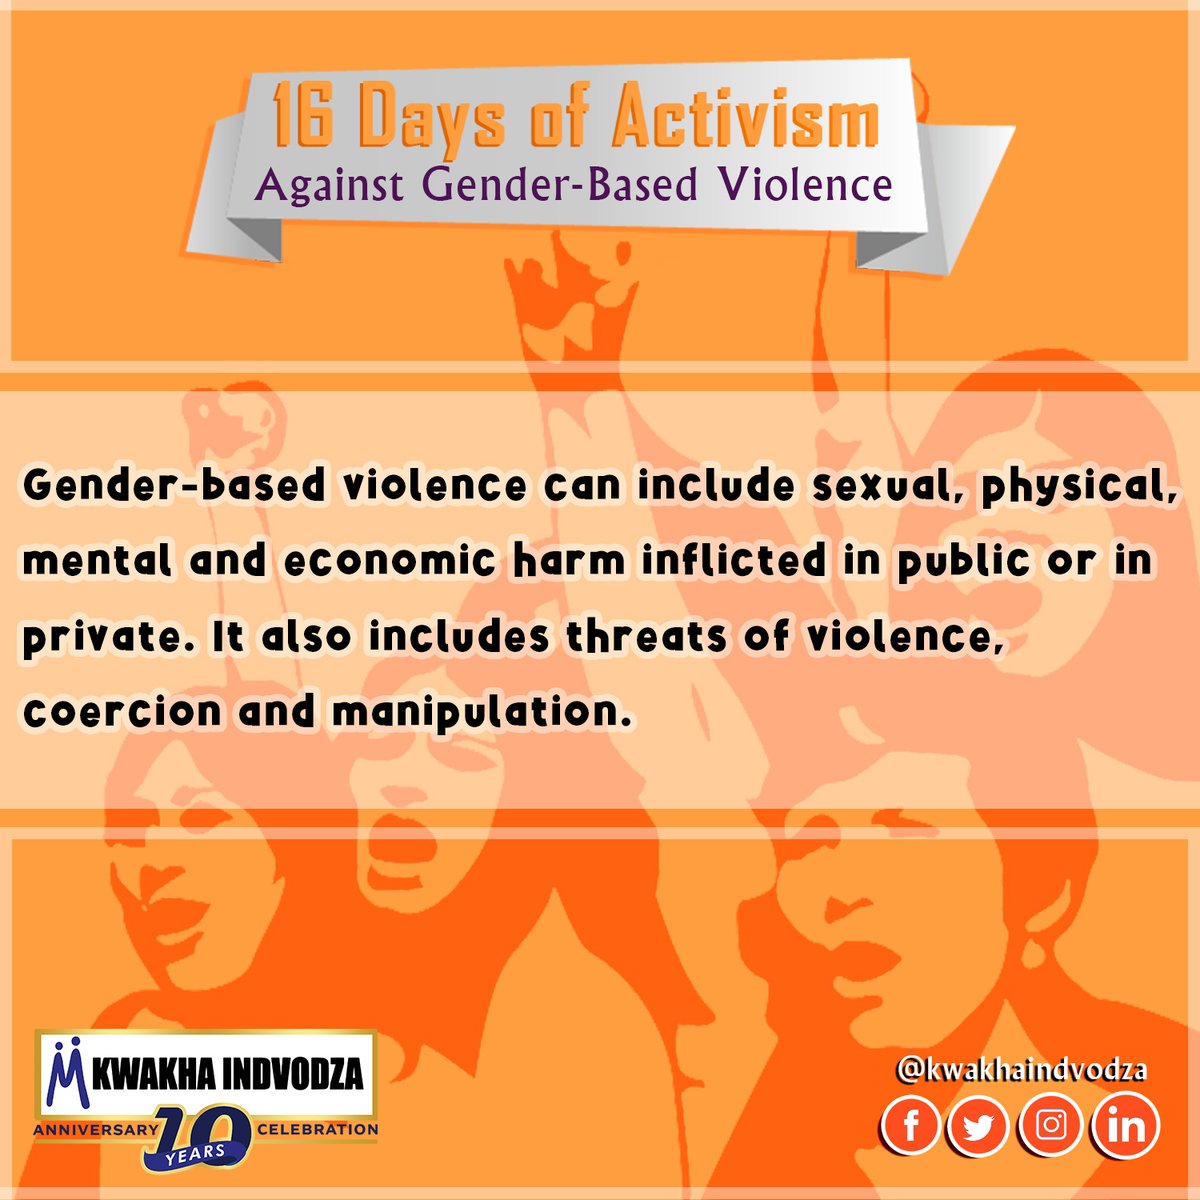 Being hard to spot it doesn’t disqualify if from being real and a form of GBV! Some forms are hard to spot, that doesn’t mean though we shouldn’t speak against them and #UNiTE! #EndingGBV #16DaysofActivism2022 #orangetheworld #KwakhaIndvodza